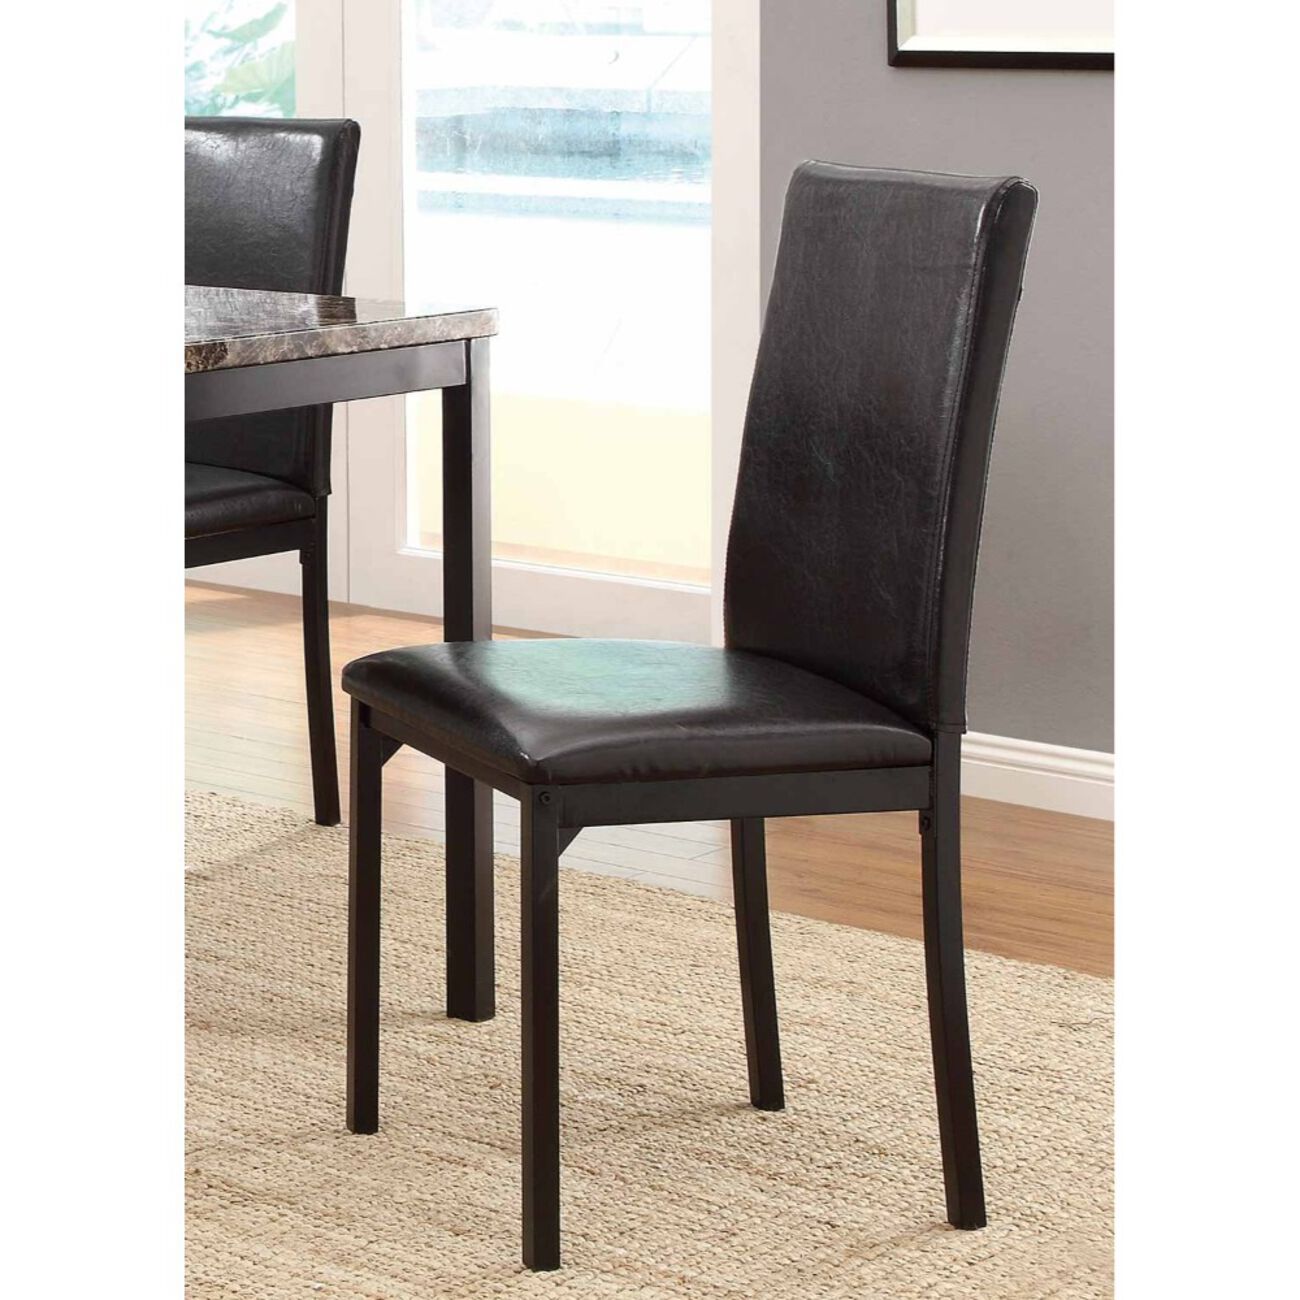 Leatherette Upholstered Counter Height Metal Frame Side Chair, Dark Brown (Set of 4)